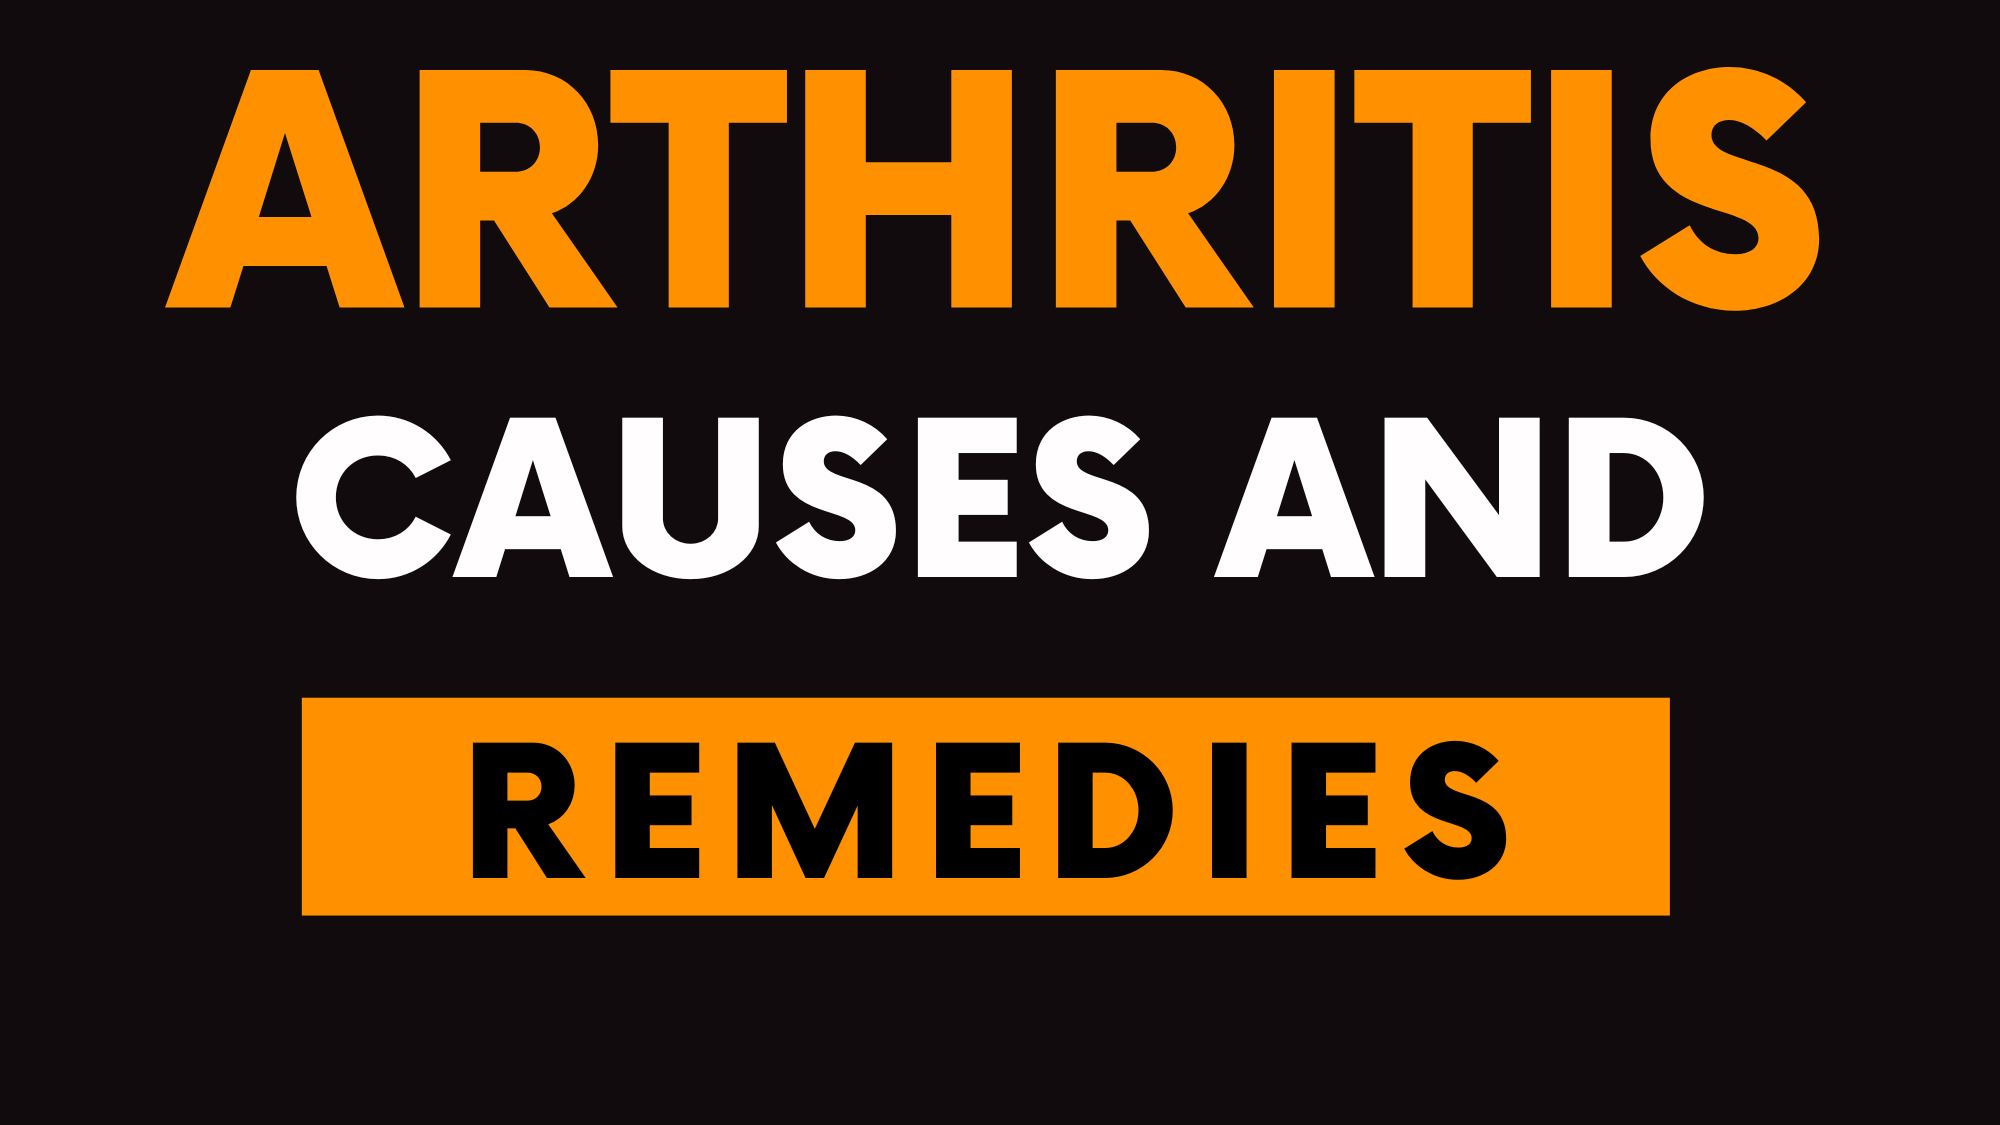 Arthritis causes and remedies